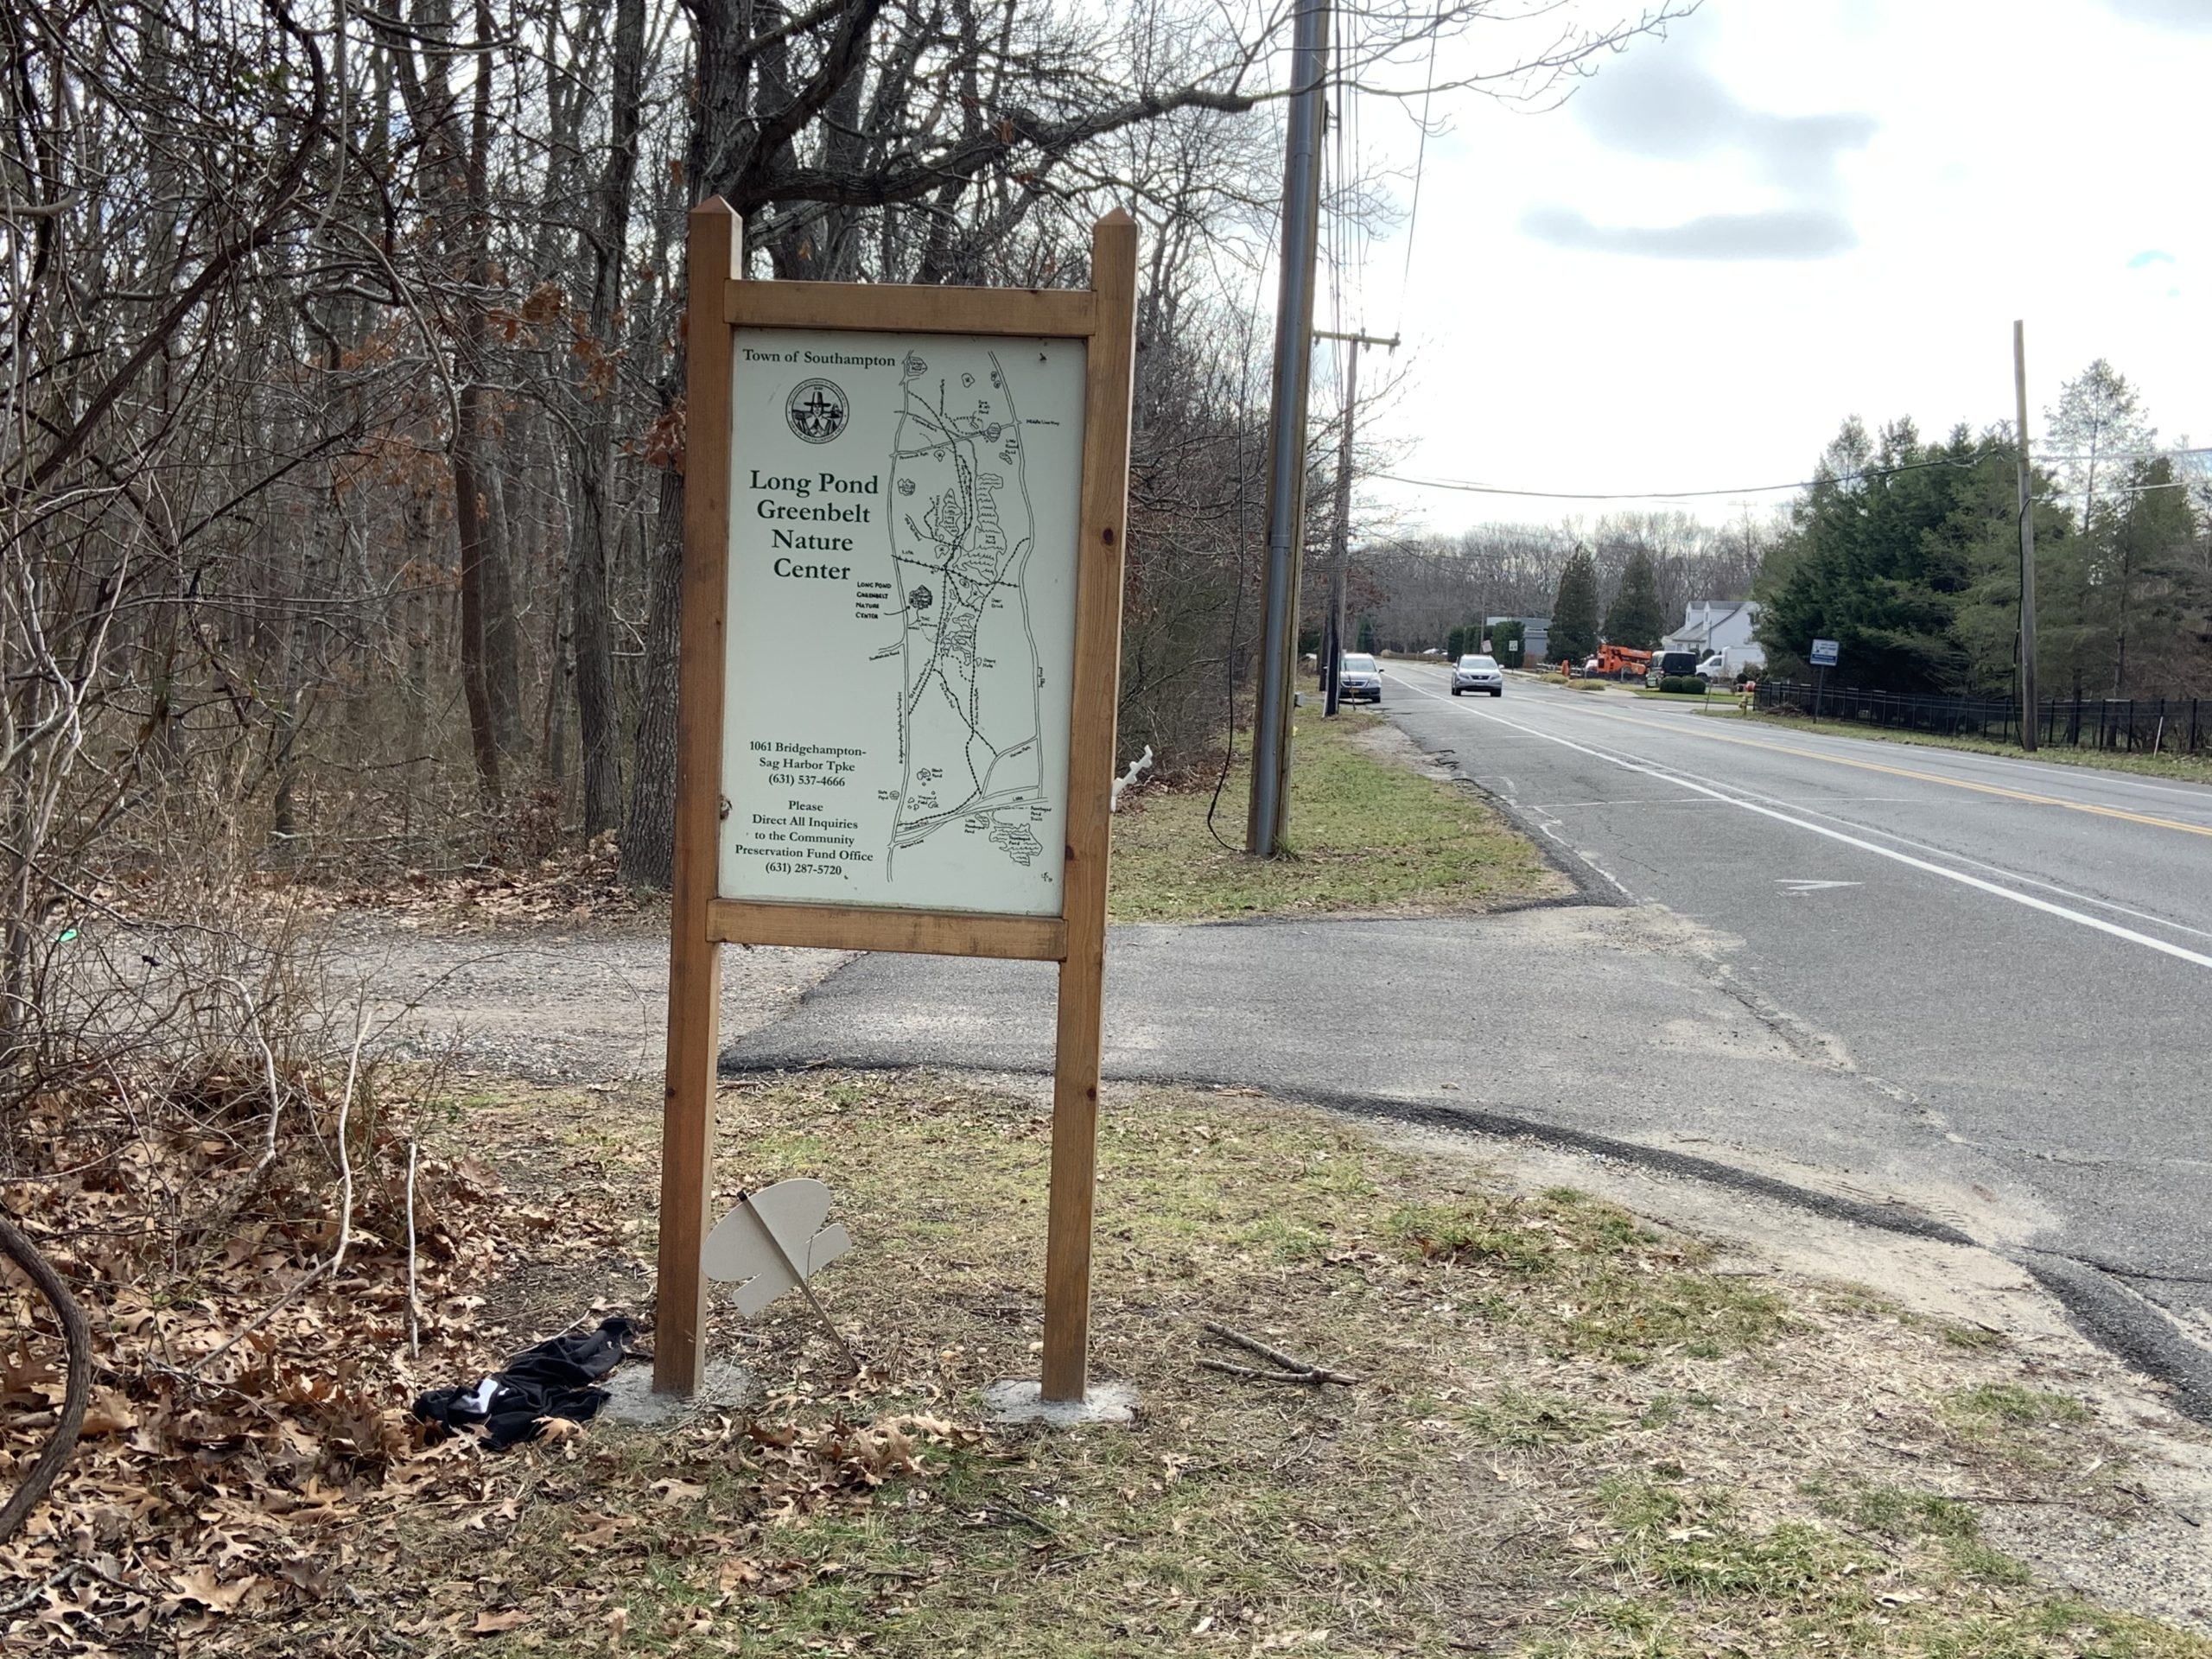 The entrance to the Long Pond Greenbelt on the Bridgehampton-Sag Harbor Turnpike is marked with a trail sign. STEPHEN J. KOTZ